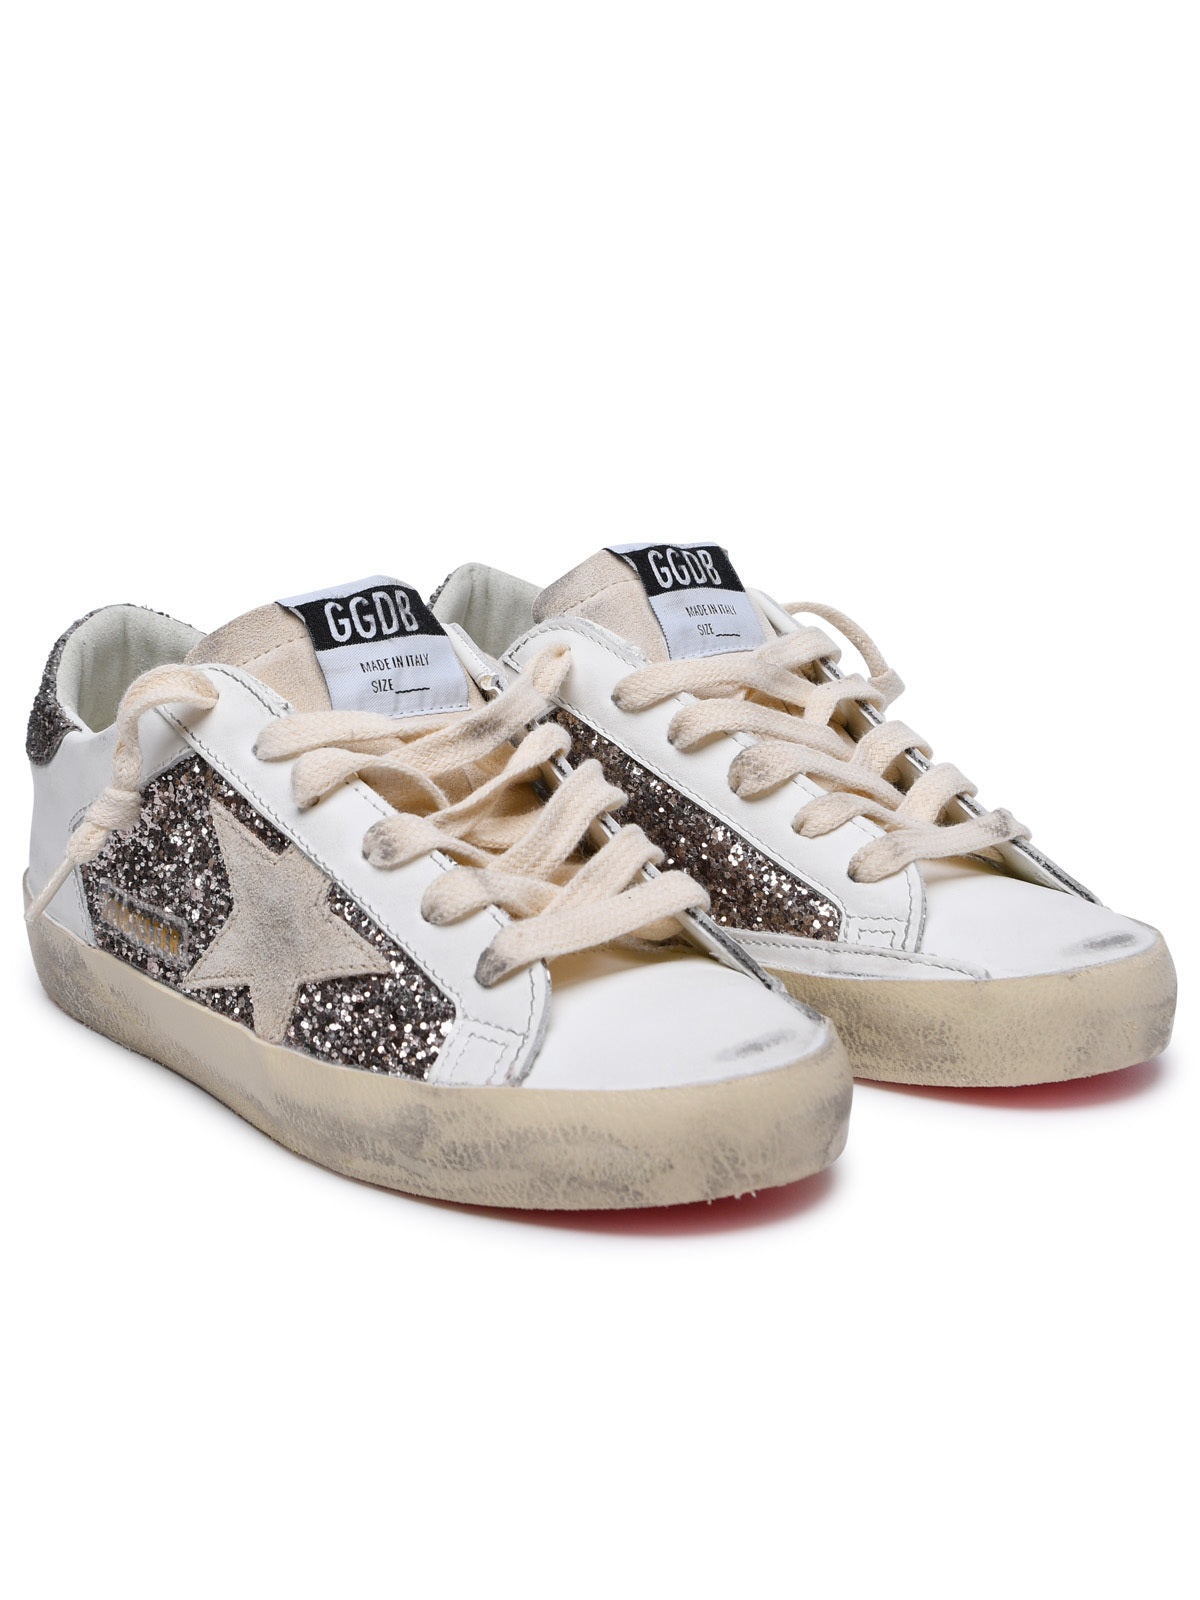 Golden Goose Woman Golden Goose 'Super-Star' White Leather Sneakers - 2